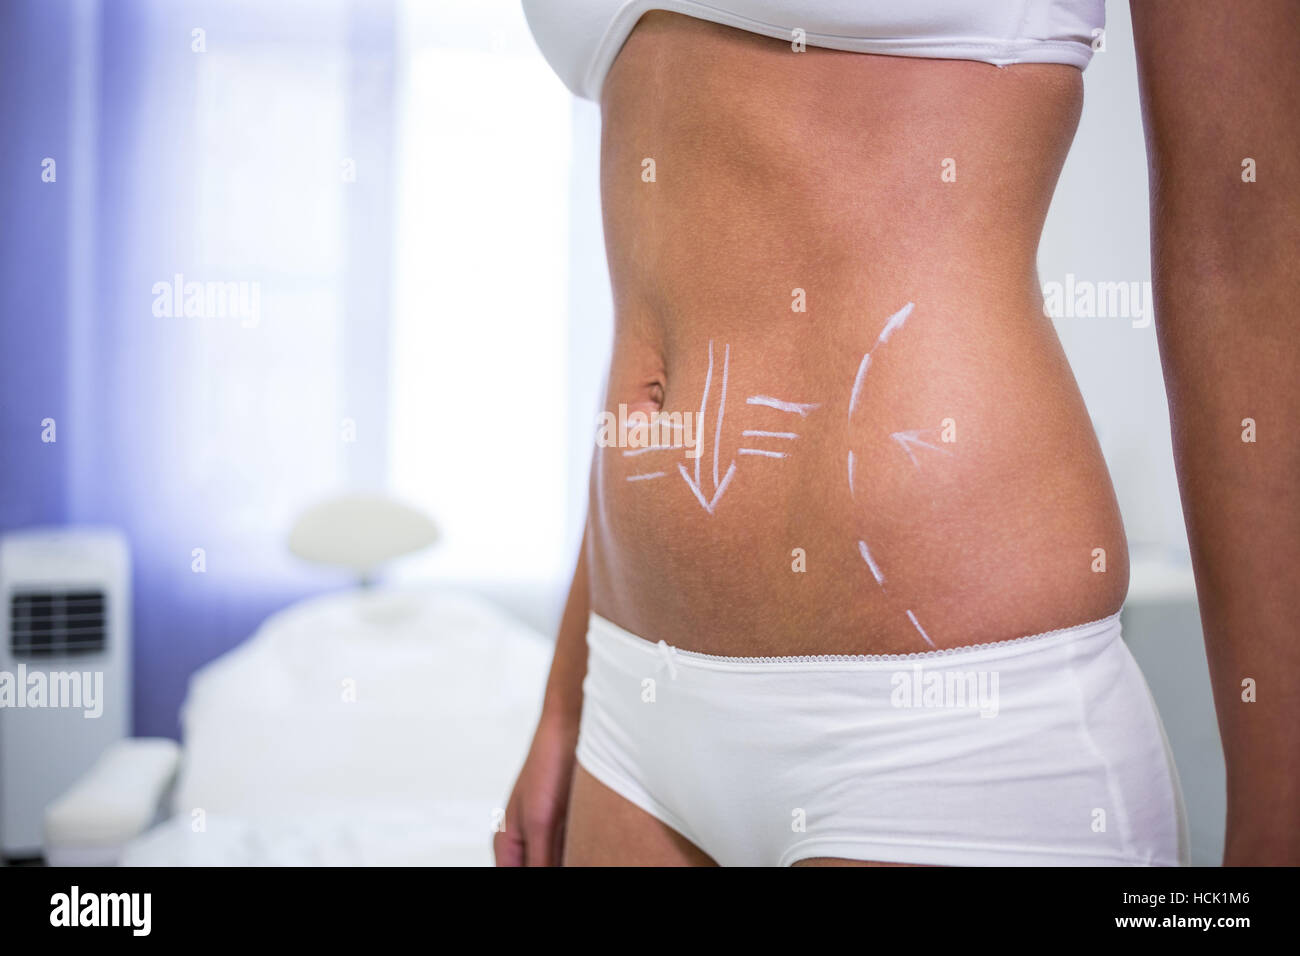 Female body with the drawing arrows for abdomen for liposuction and cellulite removal Stock Photo